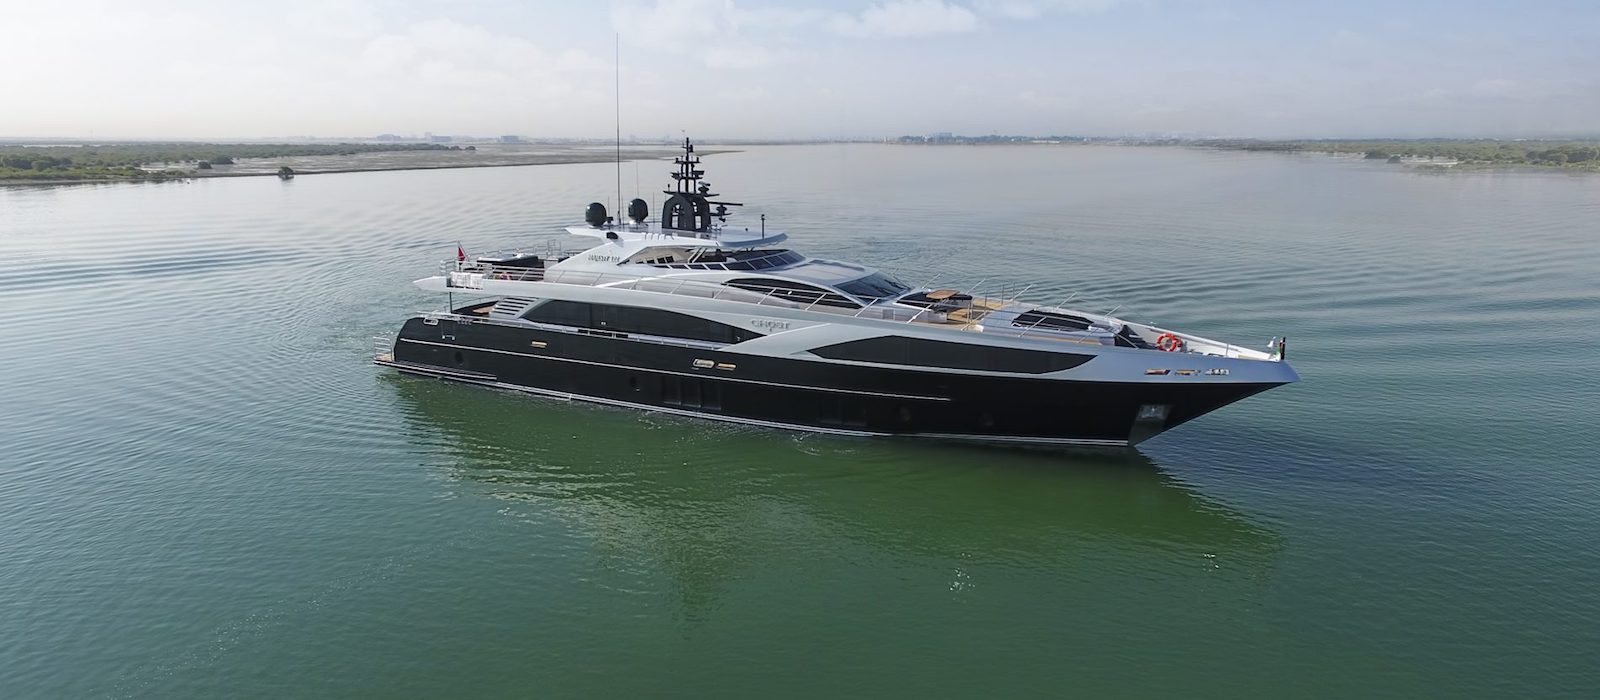 Ghost II superyacht hire on calm waters